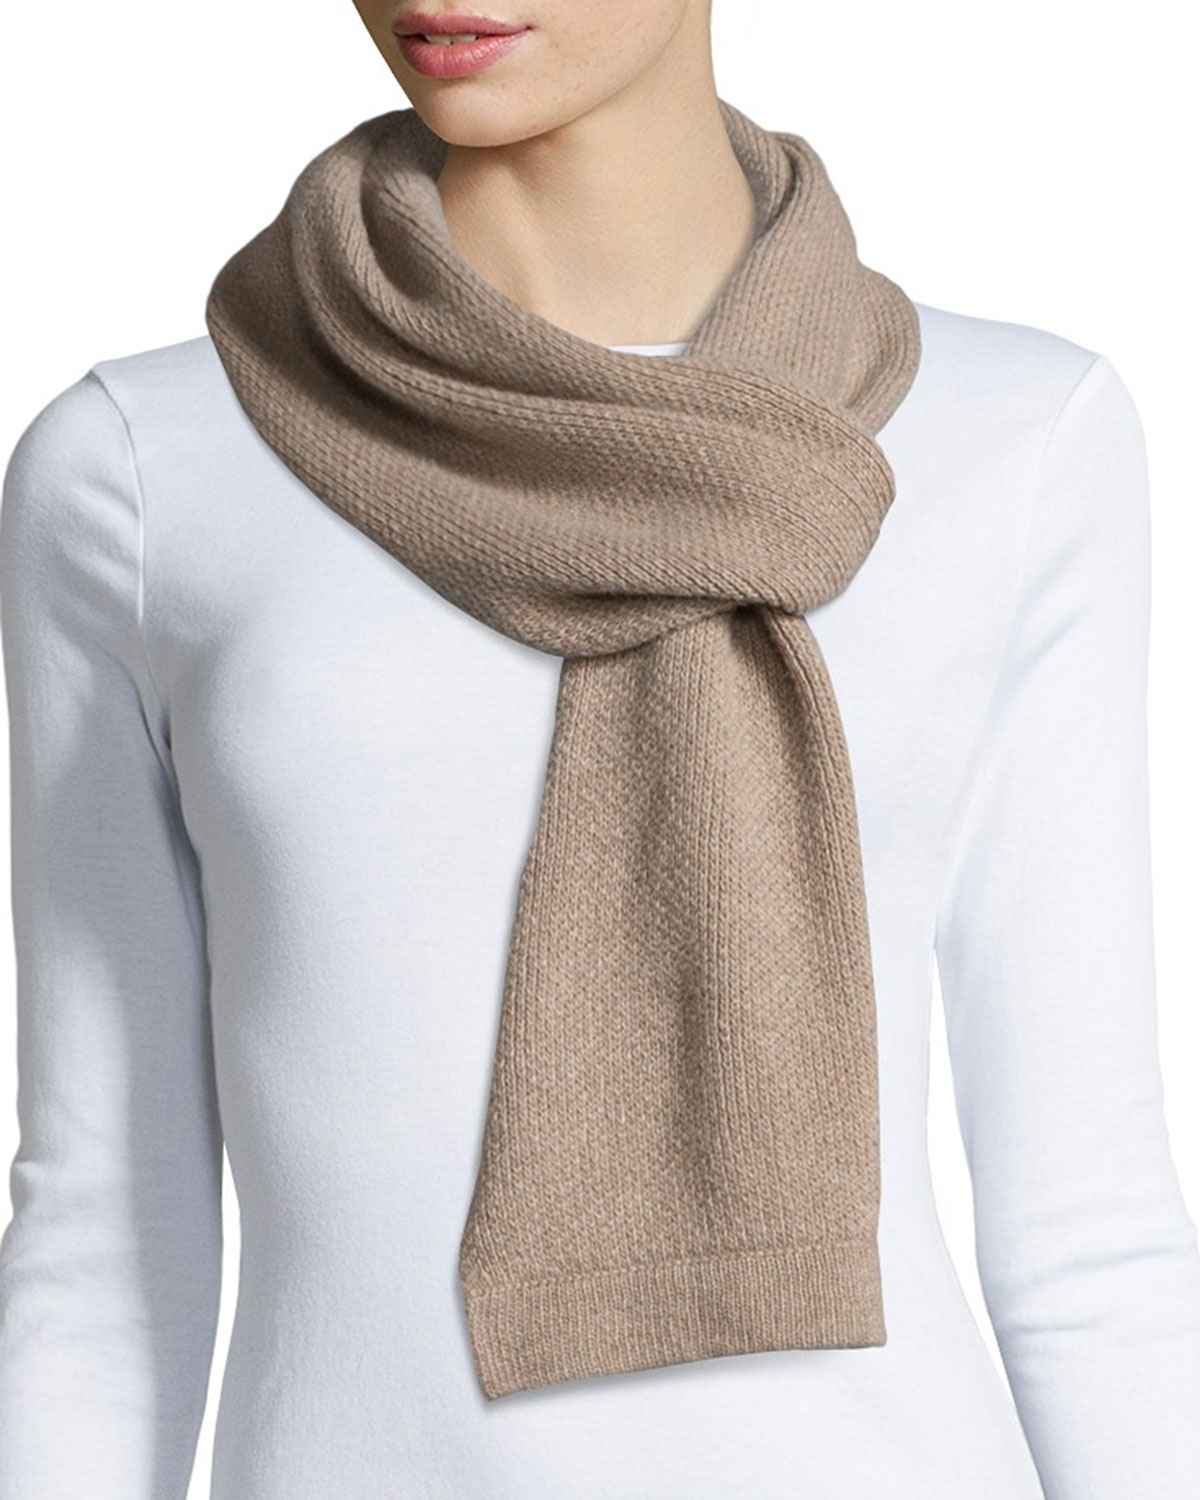 Lyst - Portolano Cashmere Honeycomb-knit Scarf in Brown